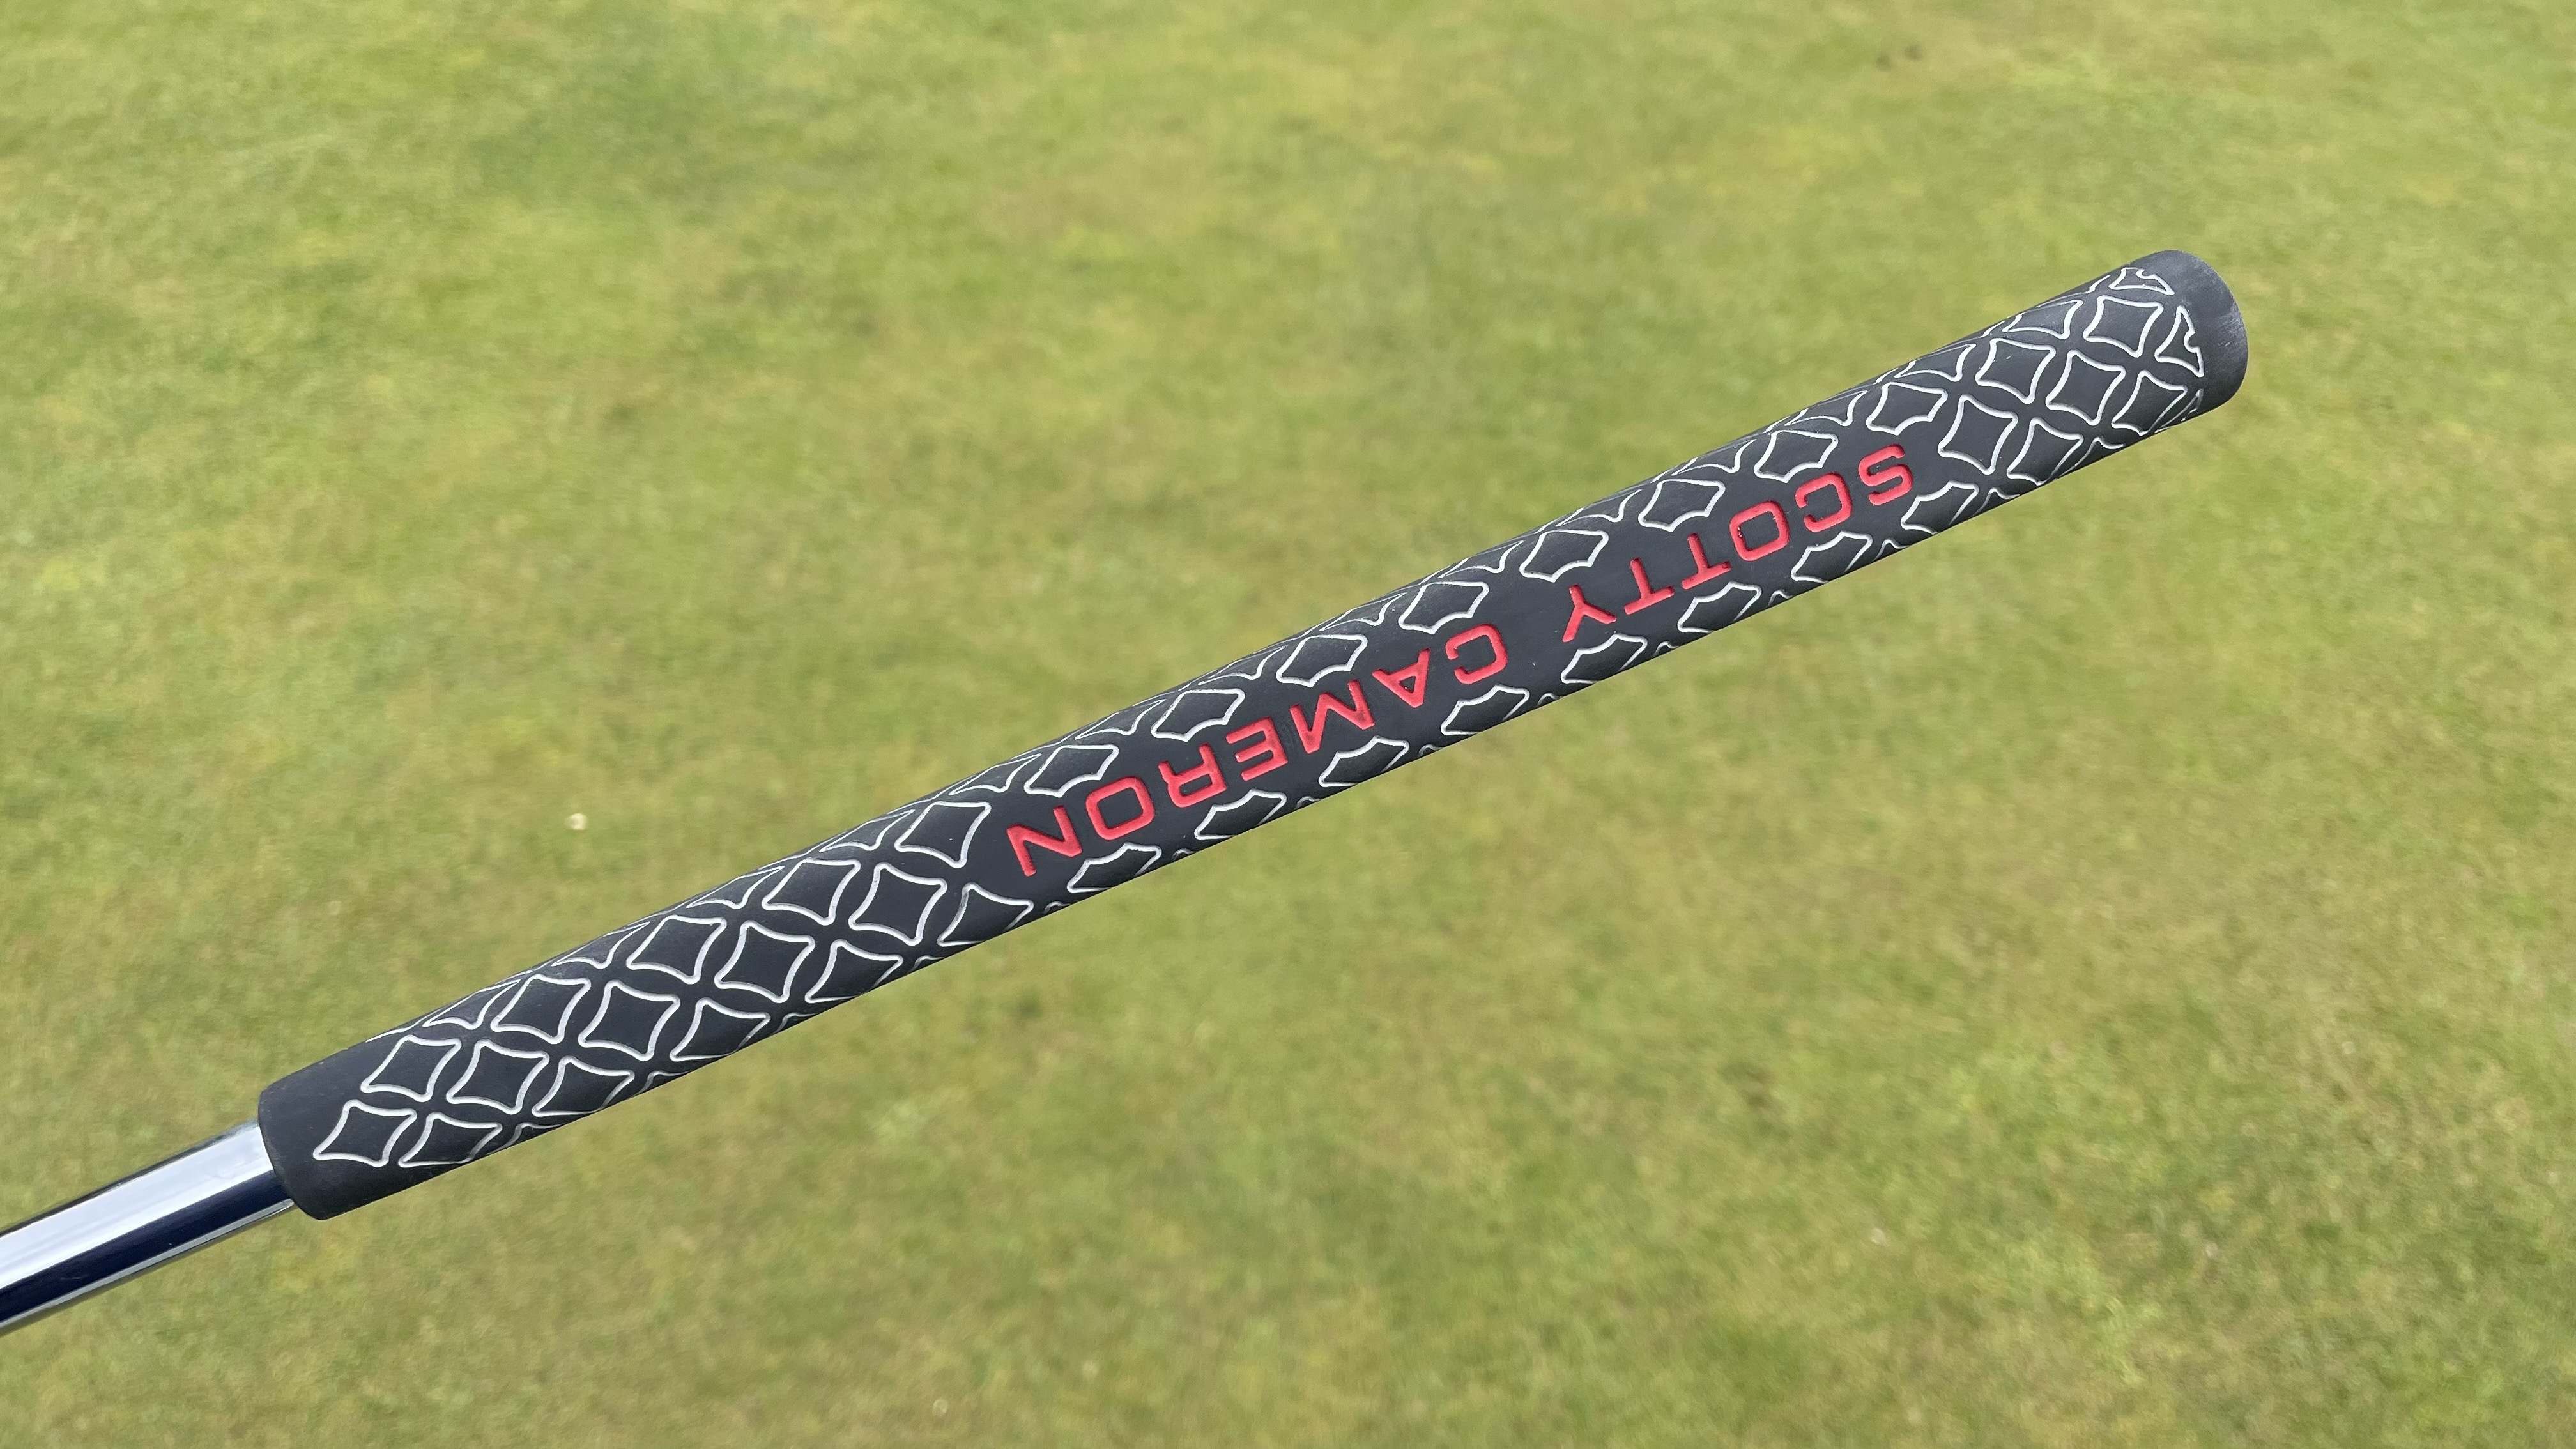 Photo of scotty cameron putter grip